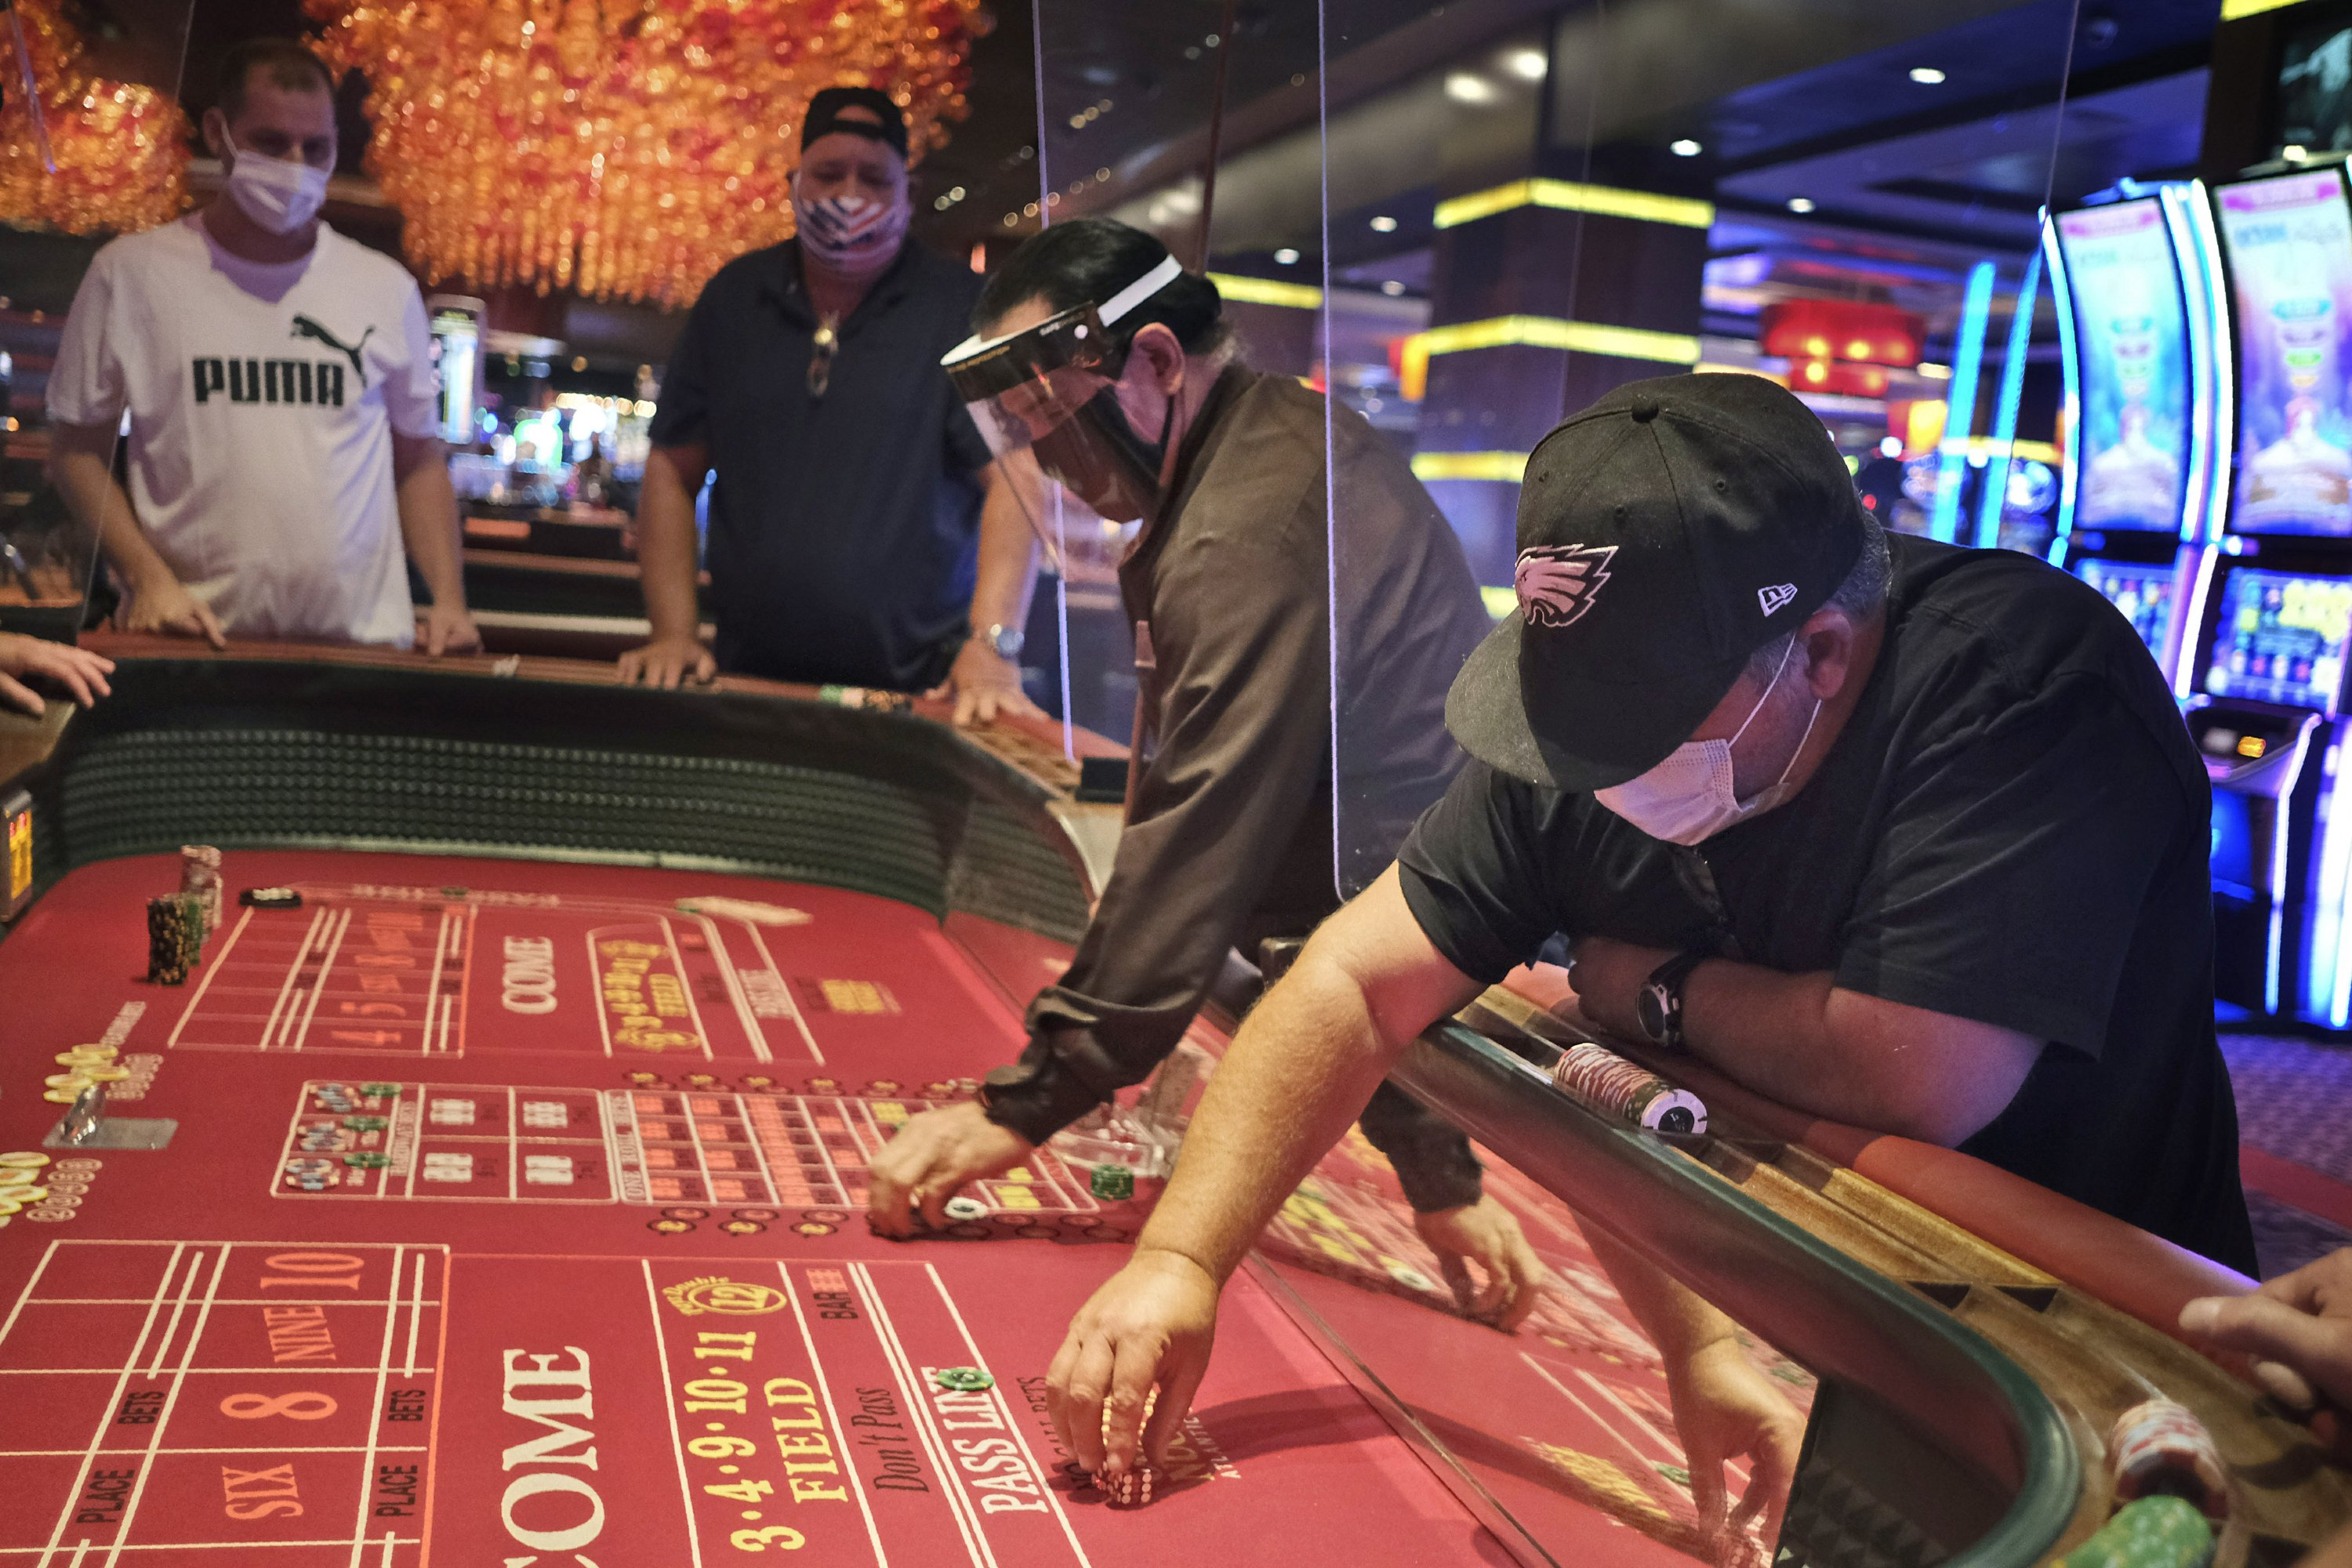 Atlantic City casinos reopen in a changed pandemic world